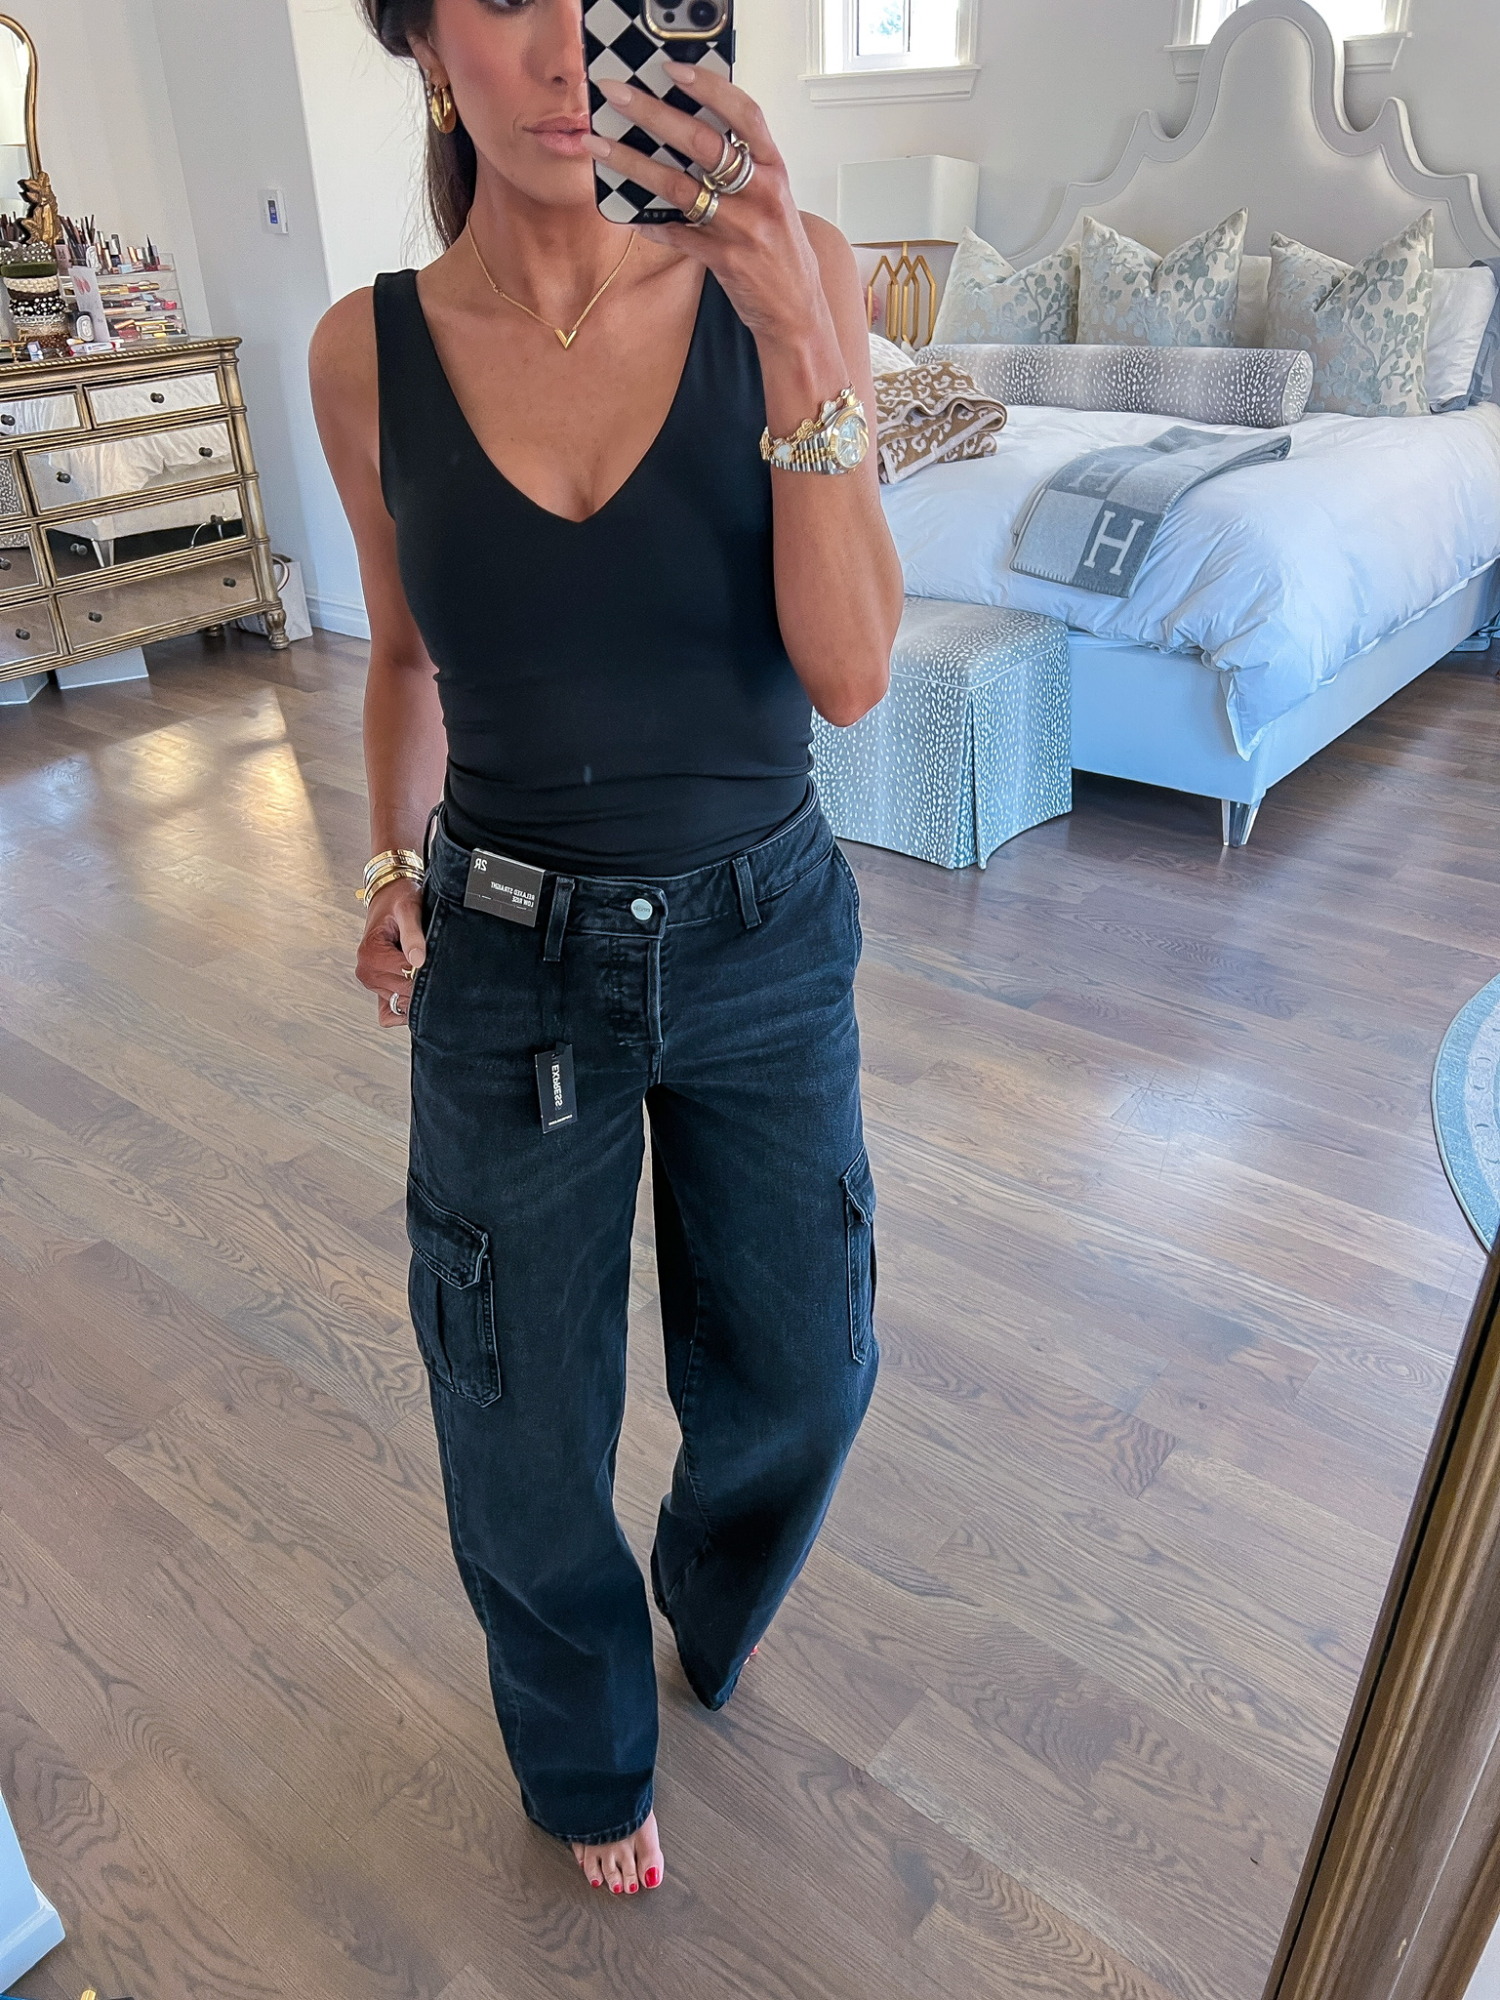 express cargo jeans outfit ideas, express presidents day sale 2023, emily ann gemma spring fashion 2023